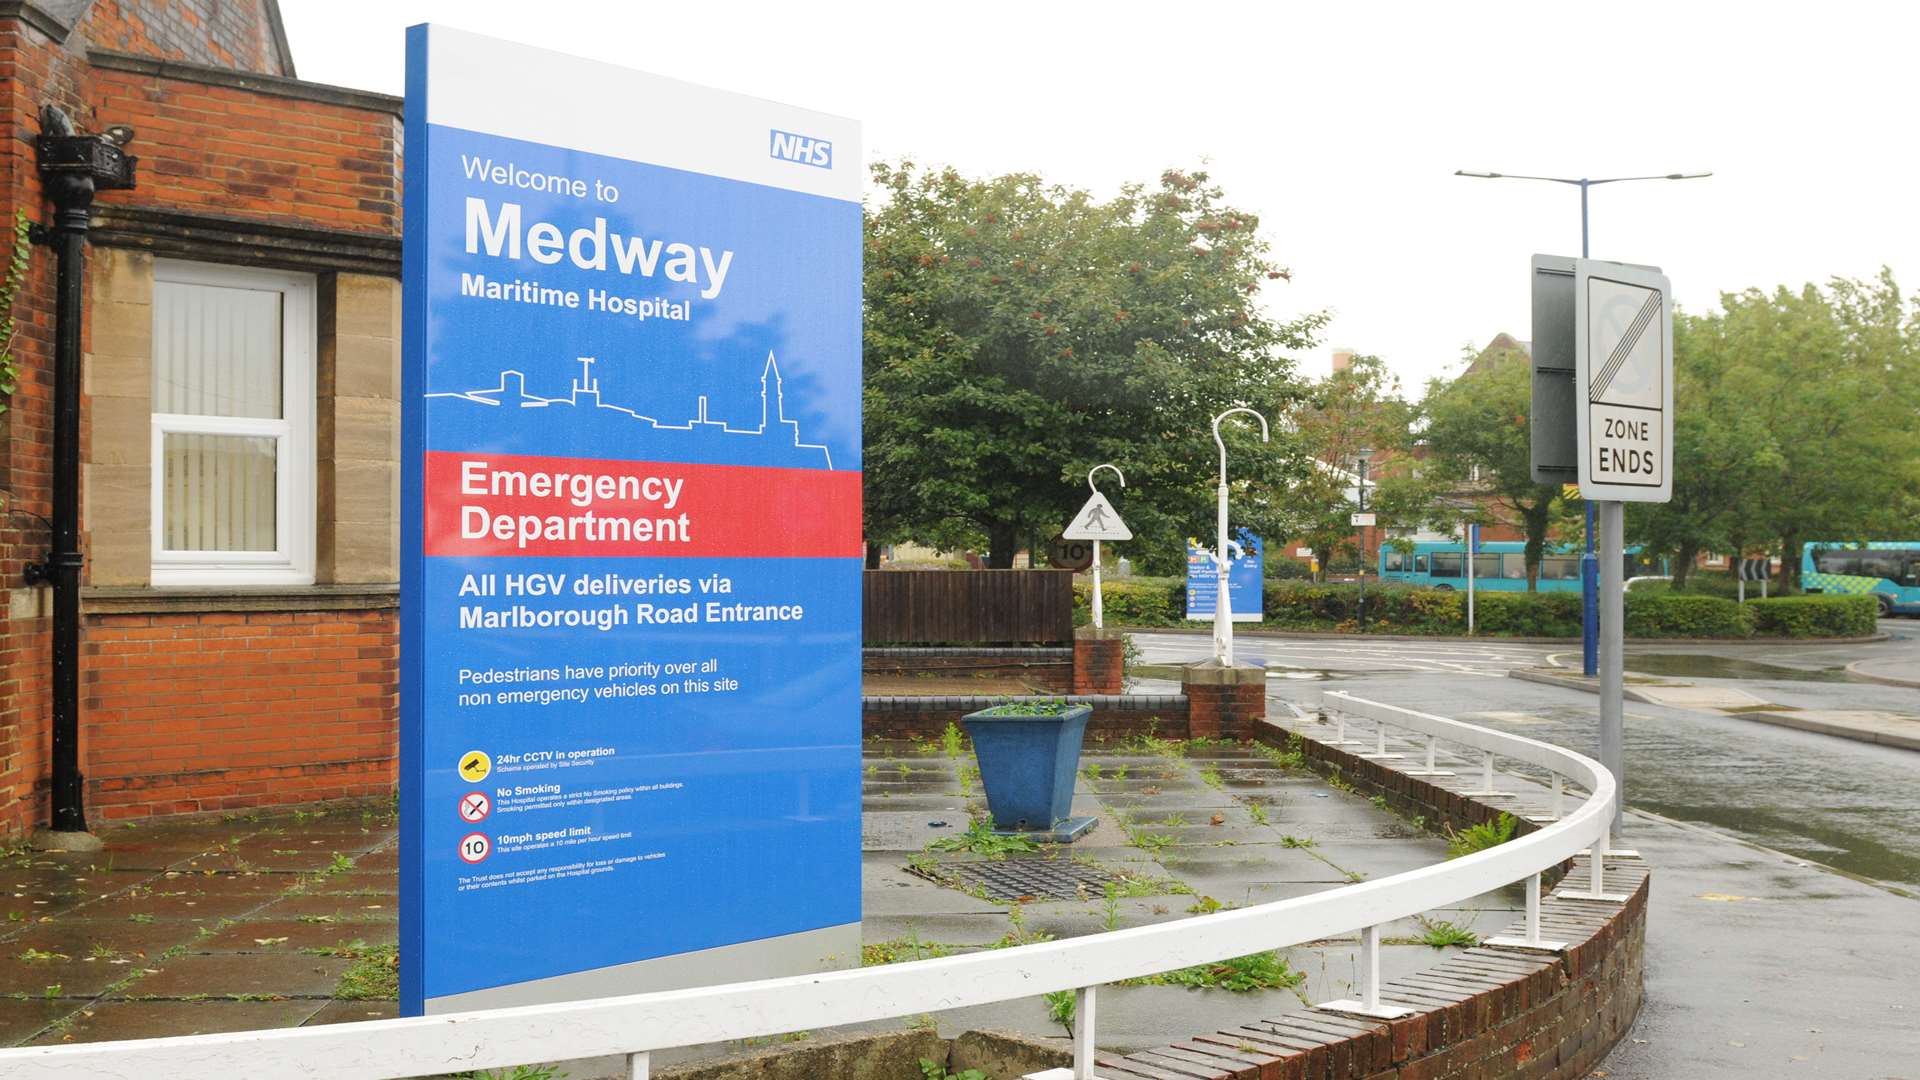 Cliff Evans has helped transform the A&E department at Medway Maritime Hospital